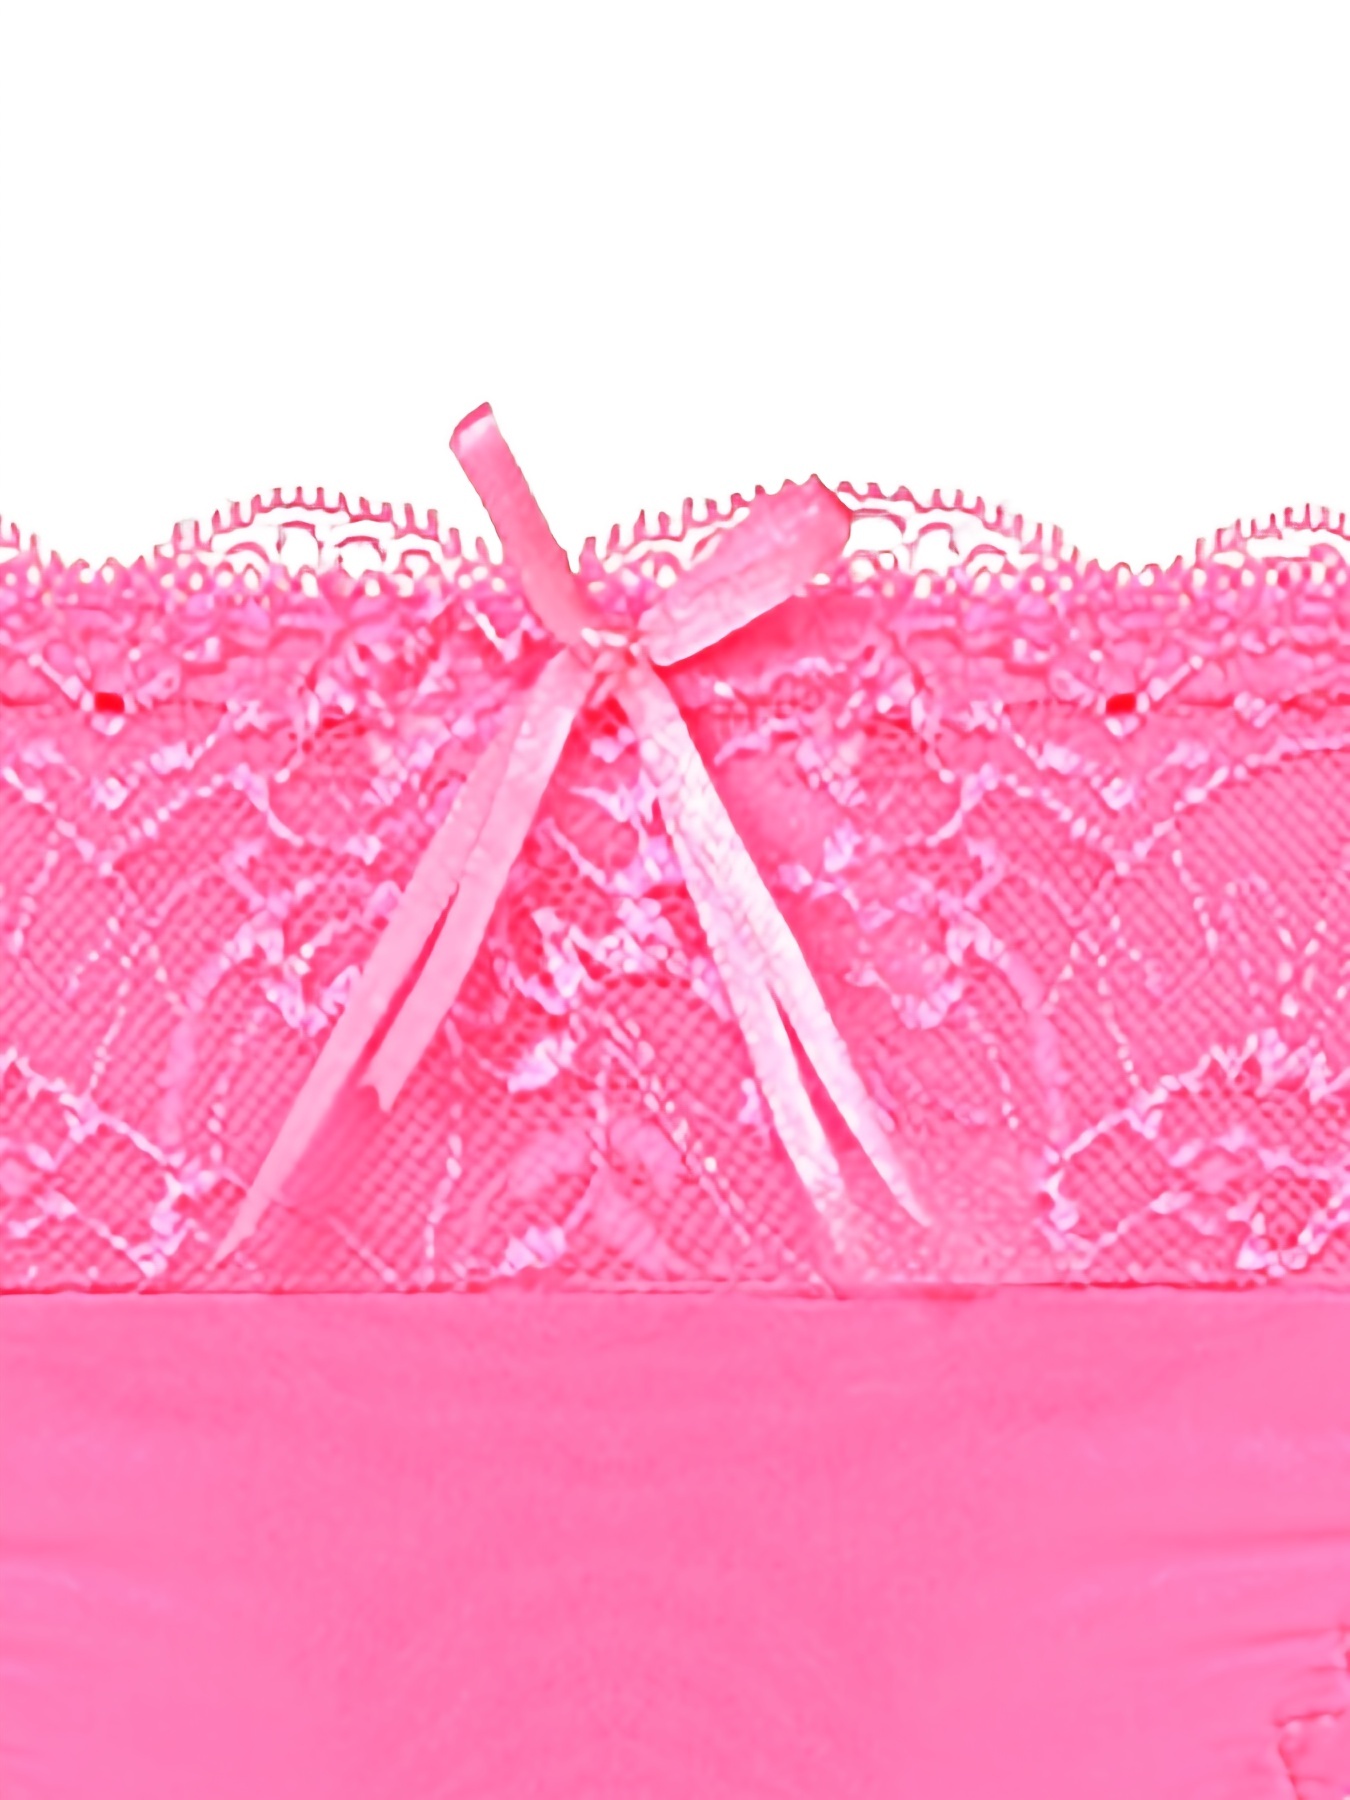 Luxury Lace Medium Knickers in Pink